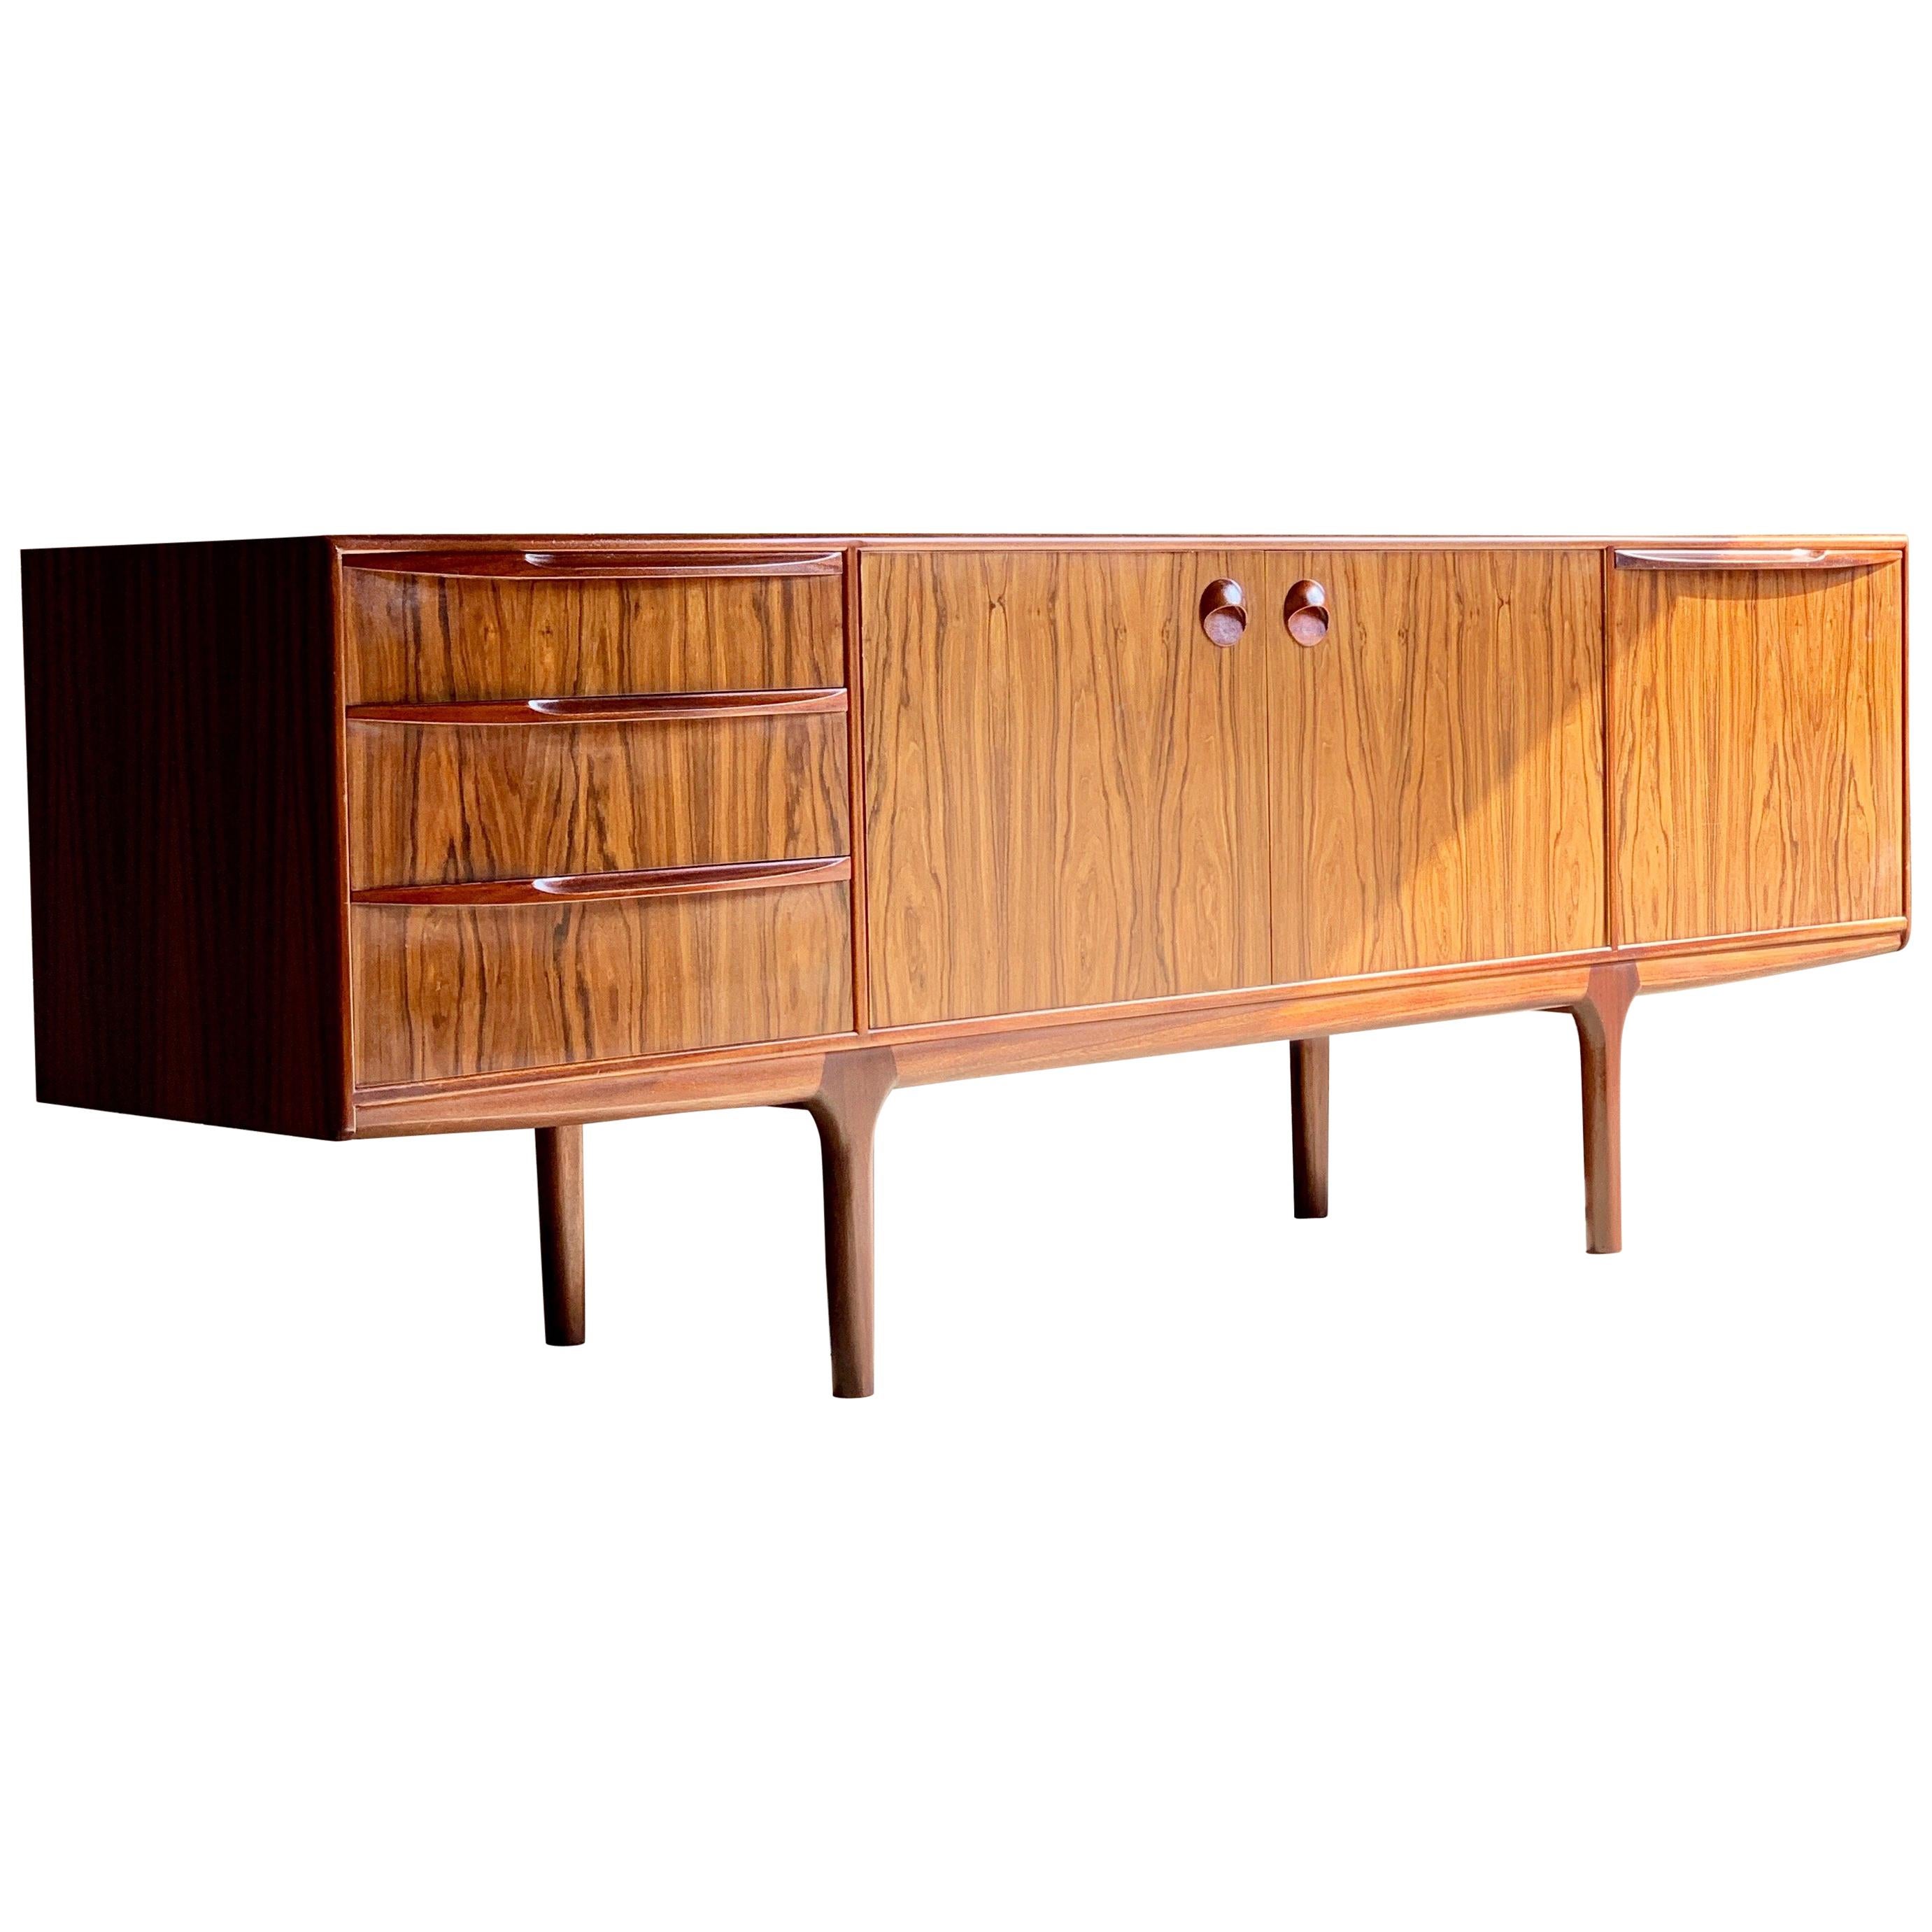 McIntosh Rosewood Sideboard Credenza Tom Robertson for A.H McIntosh circa 1960s